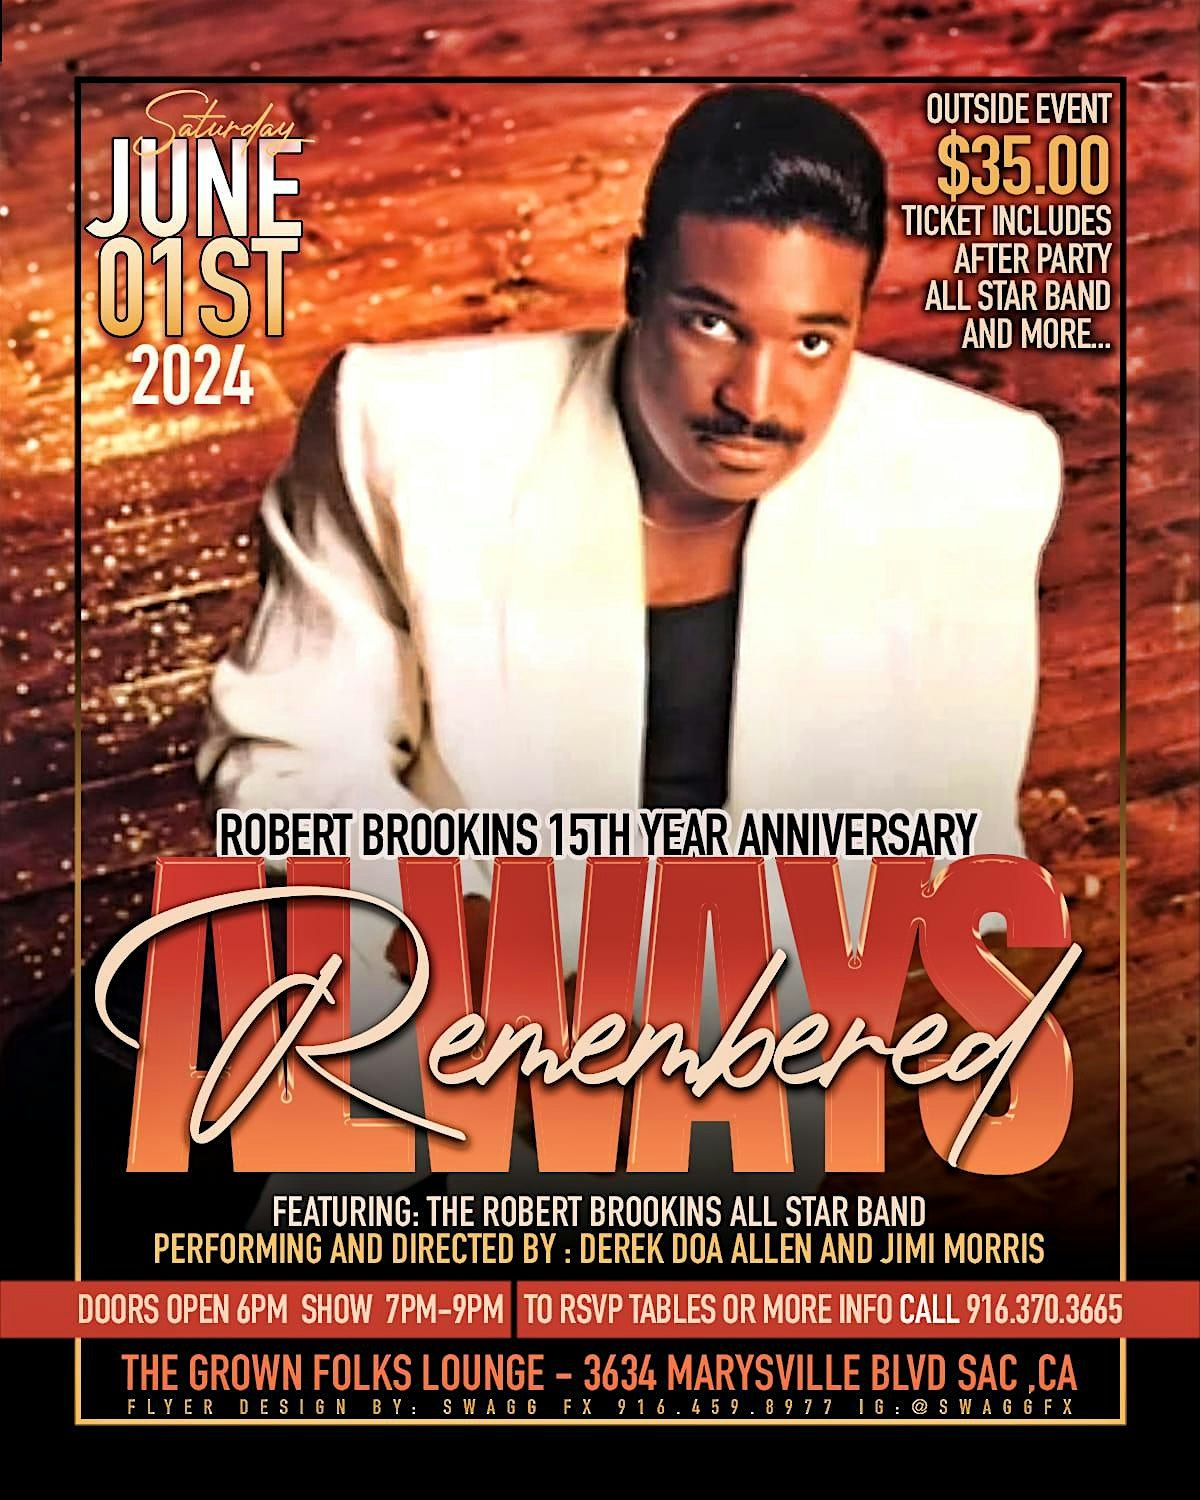 THE ROBERT BROOKINS "Always Remembered" Concert & Party